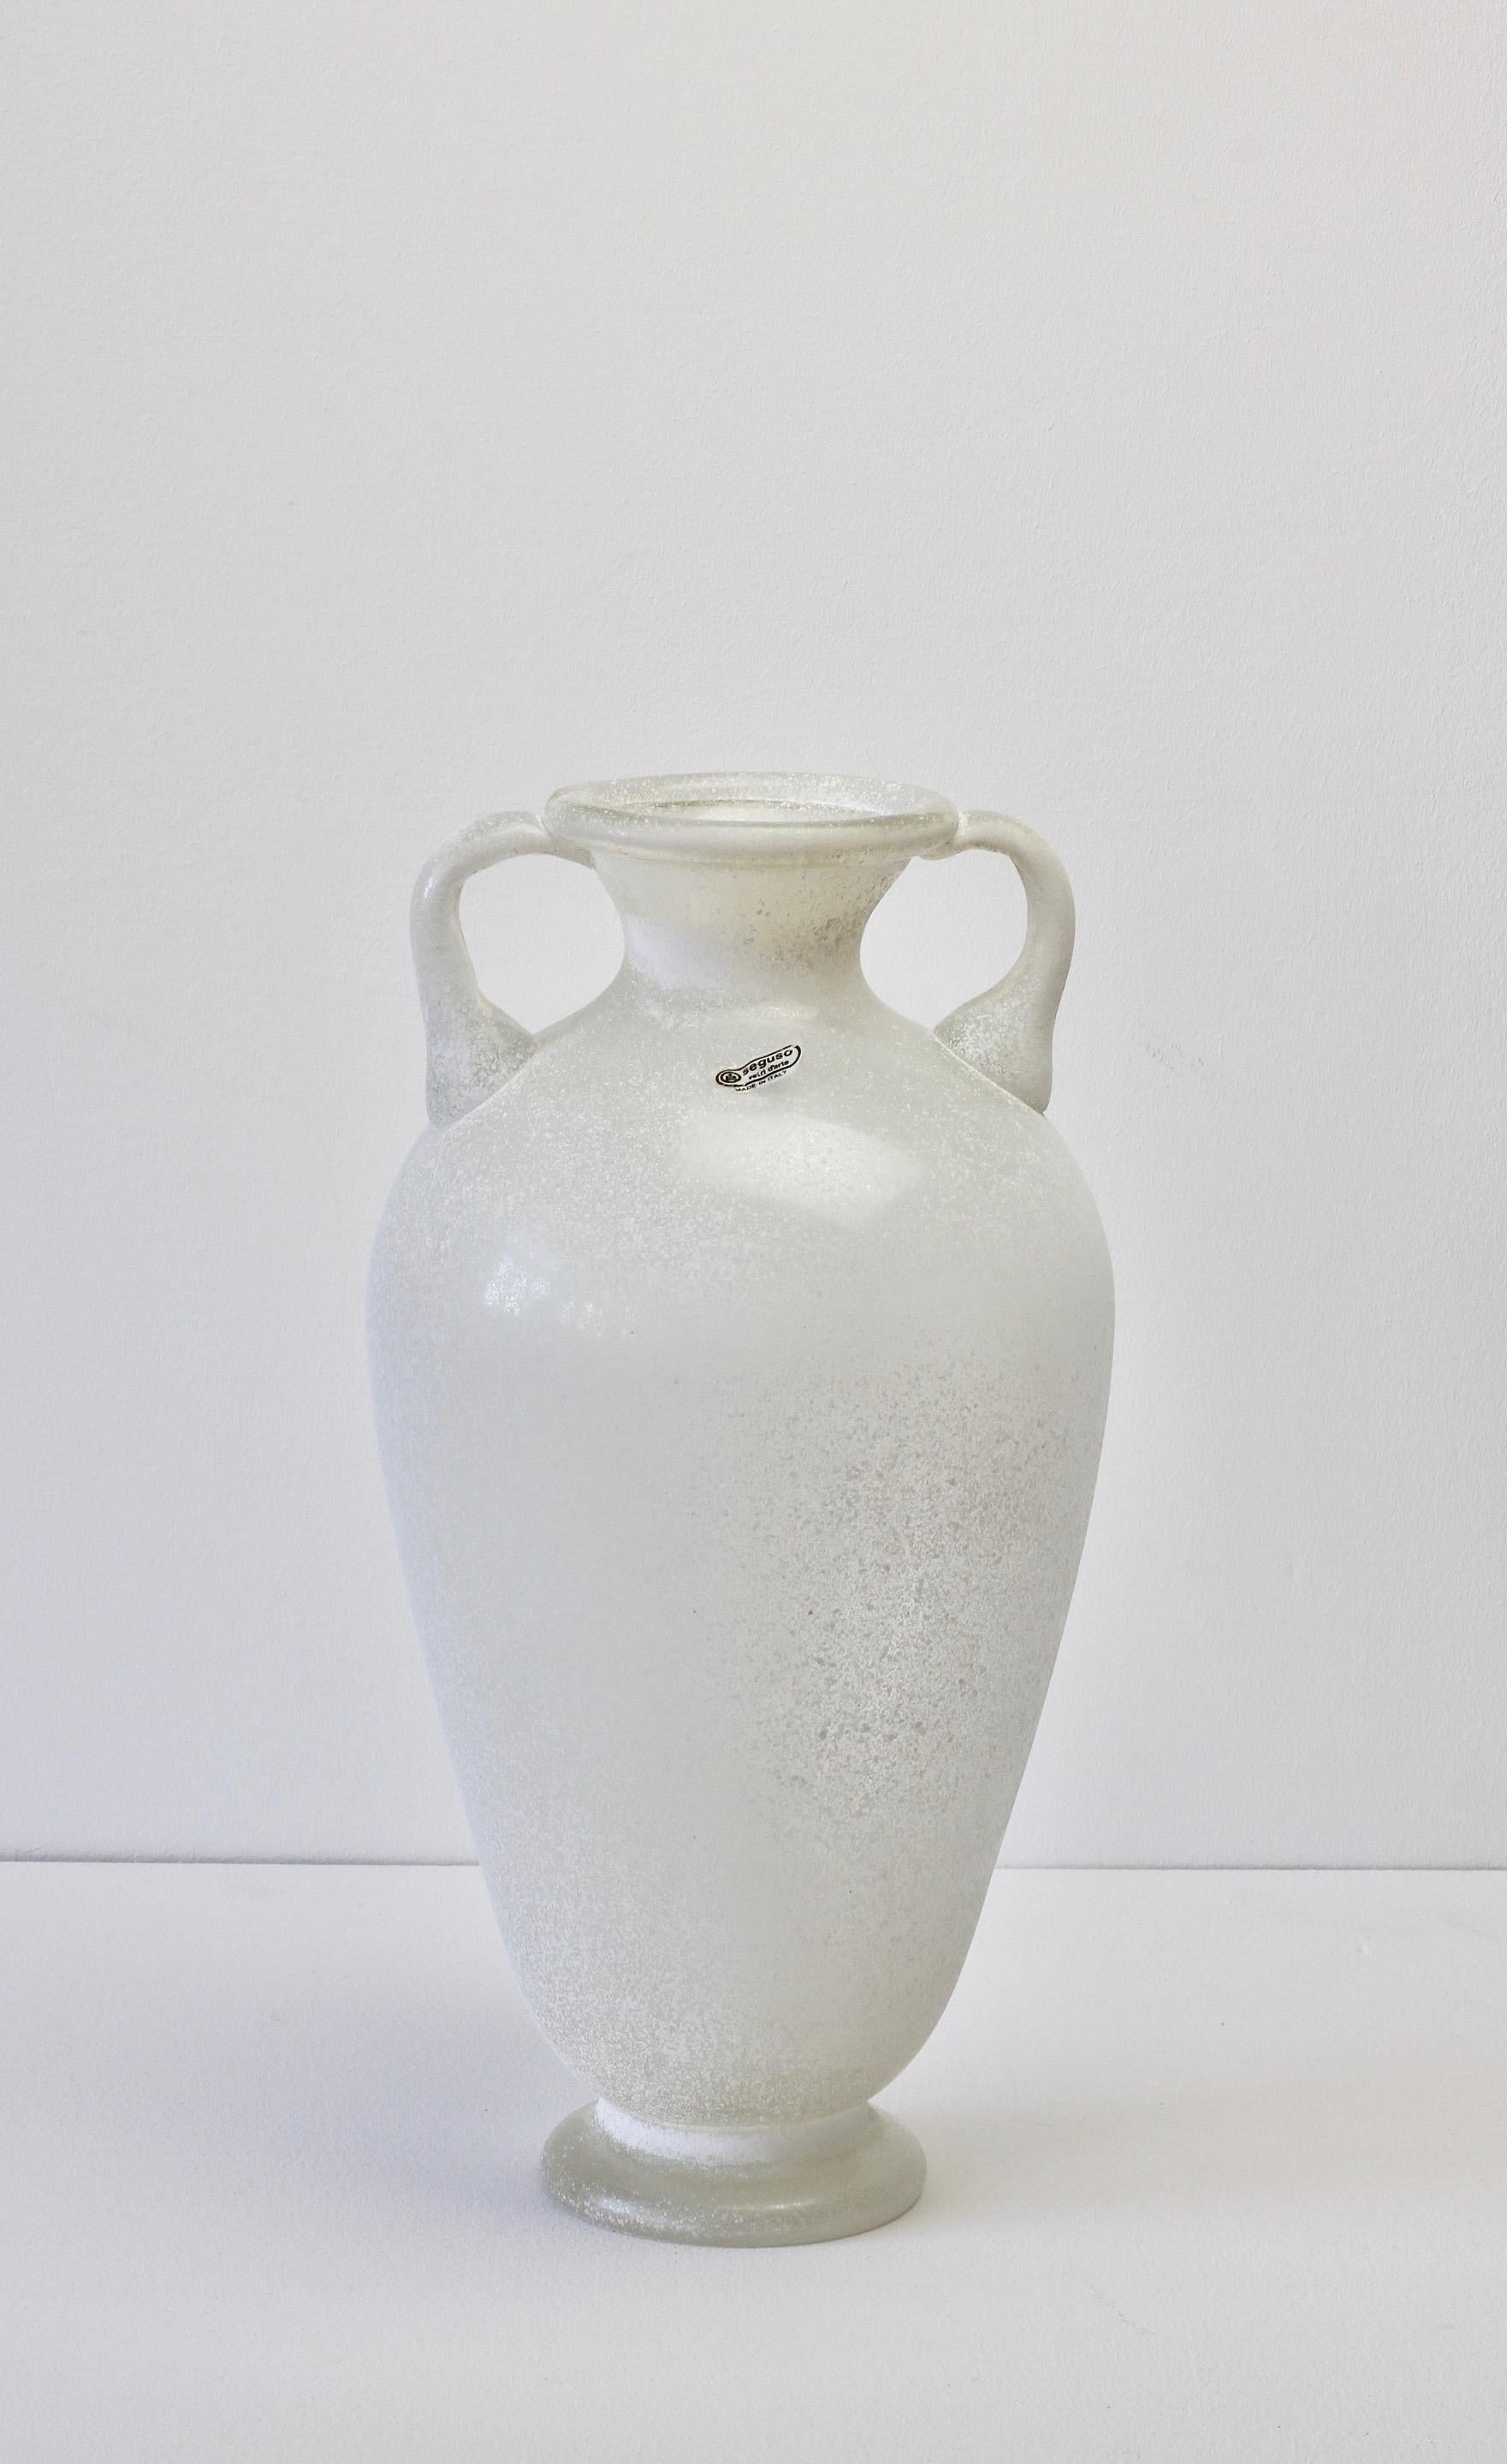 Monumental, large and elegant vintage Italian 16 inch tall 'a Scavo' white colored / colored glass Amphora or vase signed/engraved by Seguso Vetri d'Arte Murano, Italy. Elegant in form and showing extraordinary craftsmanship with the use of the